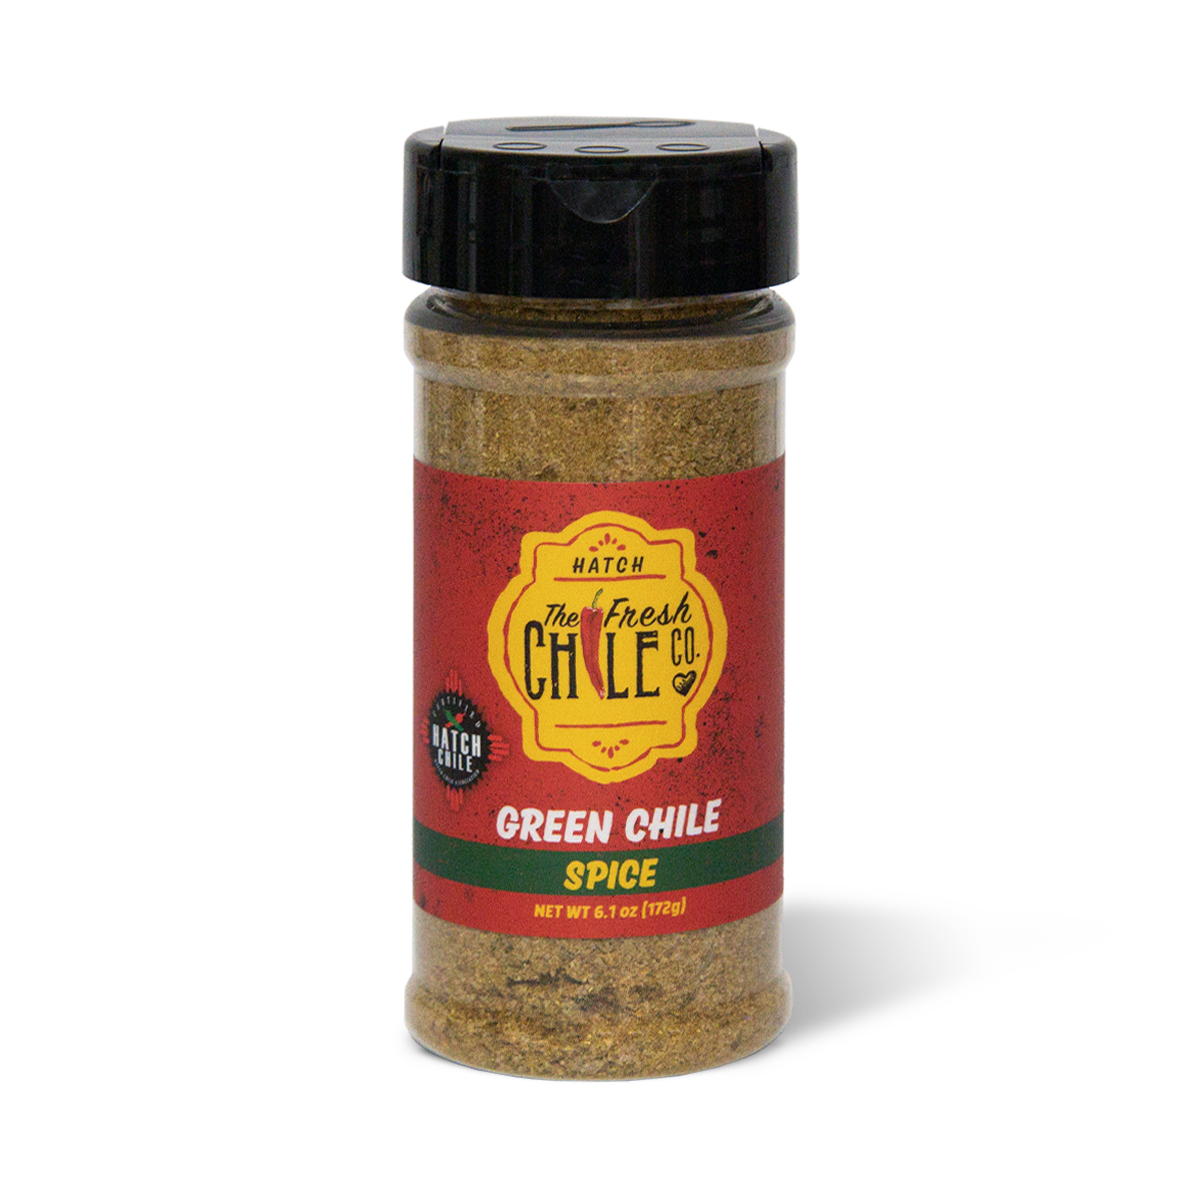 A clear shaker container of Hatch Green Chile Spice, labeled prominently with red and yellow colors, containing a visible blend of spices.